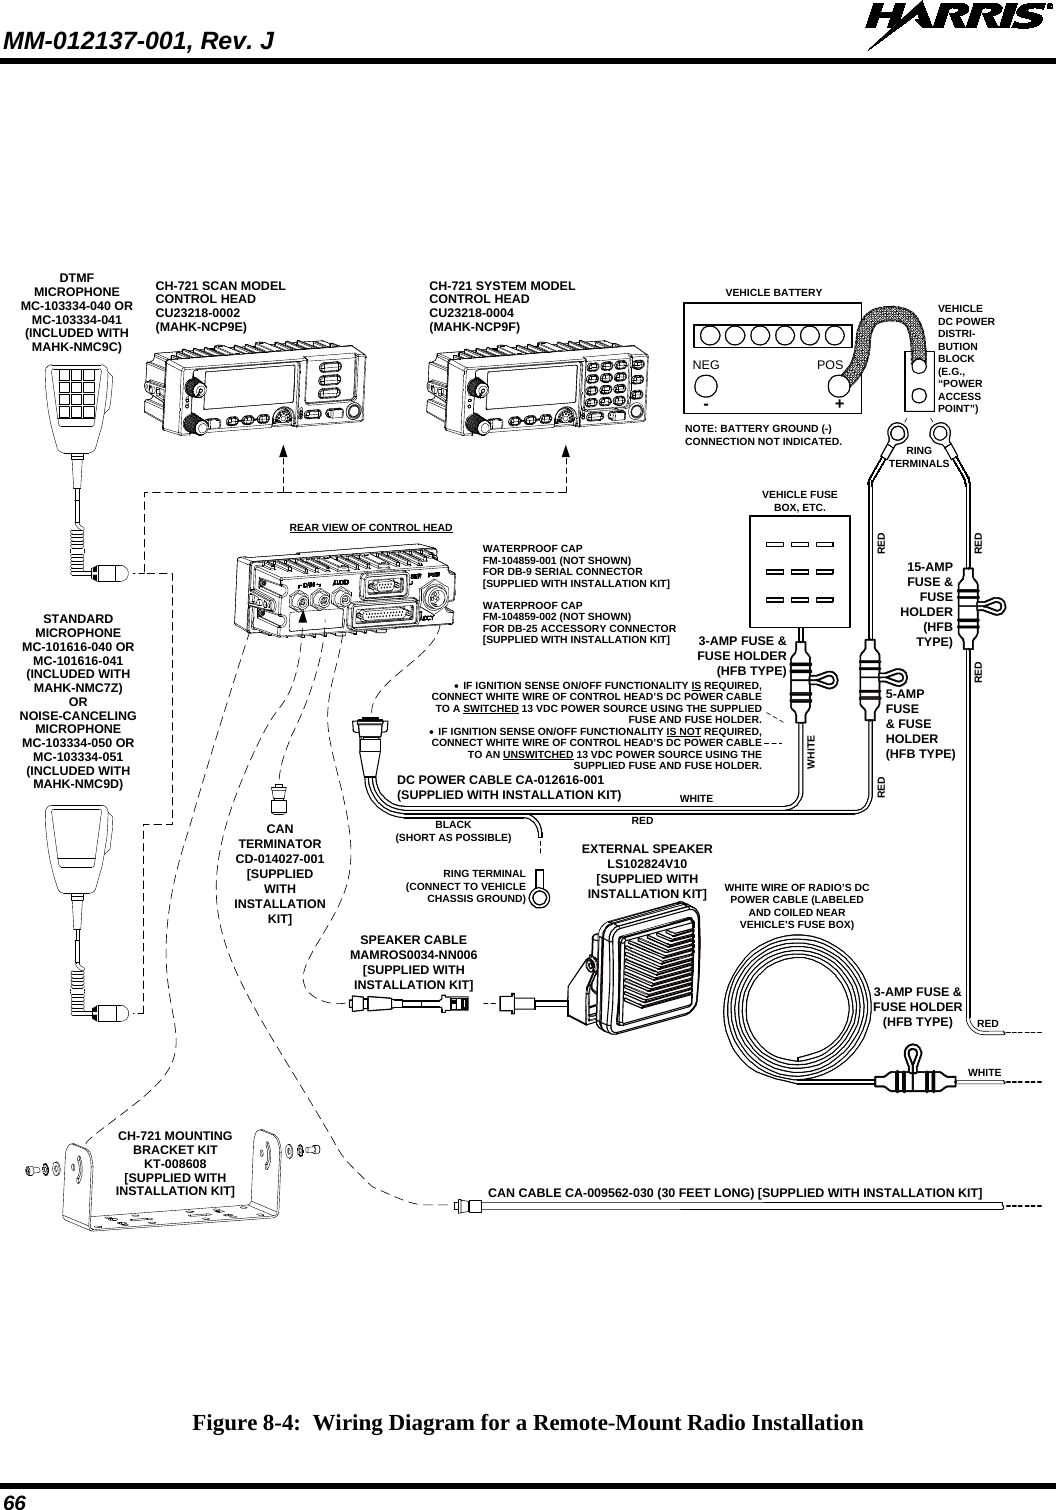 MM-012137-001, Rev. J   66  Figure 8-4:  Wiring Diagram for a Remote-Mount Radio Installation CH-721 SCAN MODELCONTROL HEADCU23218-0002(MAHK-NCP9E)CH-721 SYSTEM MODELCONTROL HEADCU23218-0004(MAHK-NCP9F)DTMFMICROPHONEMC-103334-040 ORMC-103334-041(INCLUDED WITHMAHK-NMC9C)STANDARD MICROPHONEMC-101616-040 ORMC-101616-041(INCLUDED WITHMAHK-NMC7Z)ORNOISE-CANCELINGMICROPHONEMC-103334-050 ORMC-103334-051(INCLUDED WITHMAHK-NMC9D)CH-721 MOUNTING BRACKET KITKT-008608[SUPPLIED WITH INSTALLATION KIT]•  IF IGNITION SENSE ON/OFF FUNCTIONALITY IS REQUIRED, CONNECT WHITE WIRE OF CONTROL HEAD’S DC POWER CABLE TO A SWITCHED 13 VDC POWER SOURCE USING THE SUPPLIED FUSE AND FUSE HOLDER.•  IF IGNITION SENSE ON/OFF FUNCTIONALITY IS NOT REQUIRED, CONNECT WHITE WIRE OF CONTROL HEAD’S DC POWER CABLE TO AN UNSWITCHED 13 VDC POWER SOURCE USING THE SUPPLIED FUSE AND FUSE HOLDER.WATERPROOF CAPFM-104859-001 (NOT SHOWN)FOR DB-9 SERIAL CONNECTOR[SUPPLIED WITH INSTALLATION KIT]WATERPROOF CAPFM-104859-002 (NOT SHOWN)FOR DB-25 ACCESSORY CONNECTOR[SUPPLIED WITH INSTALLATION KIT]REAR VIEW OF CONTROL HEADNEG POS3-AMP FUSE &amp; FUSE HOLDER (HFB TYPE) REDRED RED5-AMPFUSE&amp; FUSE HOLDER (HFB TYPE)3-AMP FUSE &amp; FUSE HOLDER(HFB TYPE)15-AMPFUSE &amp; FUSE HOLDER(HFB TYPE)REDWHITEREDRINGTERMINALSVEHICLEDC POWER DISTRI-BUTION BLOCK(E.G., “POWER ACCESS POINT”)VEHICLE BATTERY+-NOTE: BATTERY GROUND (-) CONNECTION NOT INDICATED.CAN TERMINATORCD-014027-001[SUPPLIED WITH INSTALLATION KIT]REDWHITEBLACK(SHORT AS POSSIBLE)RING TERMINAL (CONNECT TO VEHICLE CHASSIS GROUND)CAN CABLE CA-009562-030 (30 FEET LONG) [SUPPLIED WITH INSTALLATION KIT]SPEAKER CABLEMAMROS0034-NN006[SUPPLIED WITHINSTALLATION KIT]EXTERNAL SPEAKERLS102824V10[SUPPLIED WITHINSTALLATION KIT] WHITE WIRE OF RADIO’S DC POWER CABLE (LABELED AND COILED NEAR VEHICLE’S FUSE BOX)DC POWER CABLE CA-012616-001(SUPPLIED WITH INSTALLATION KIT)VEHICLE FUSE BOX, ETC.WHITE